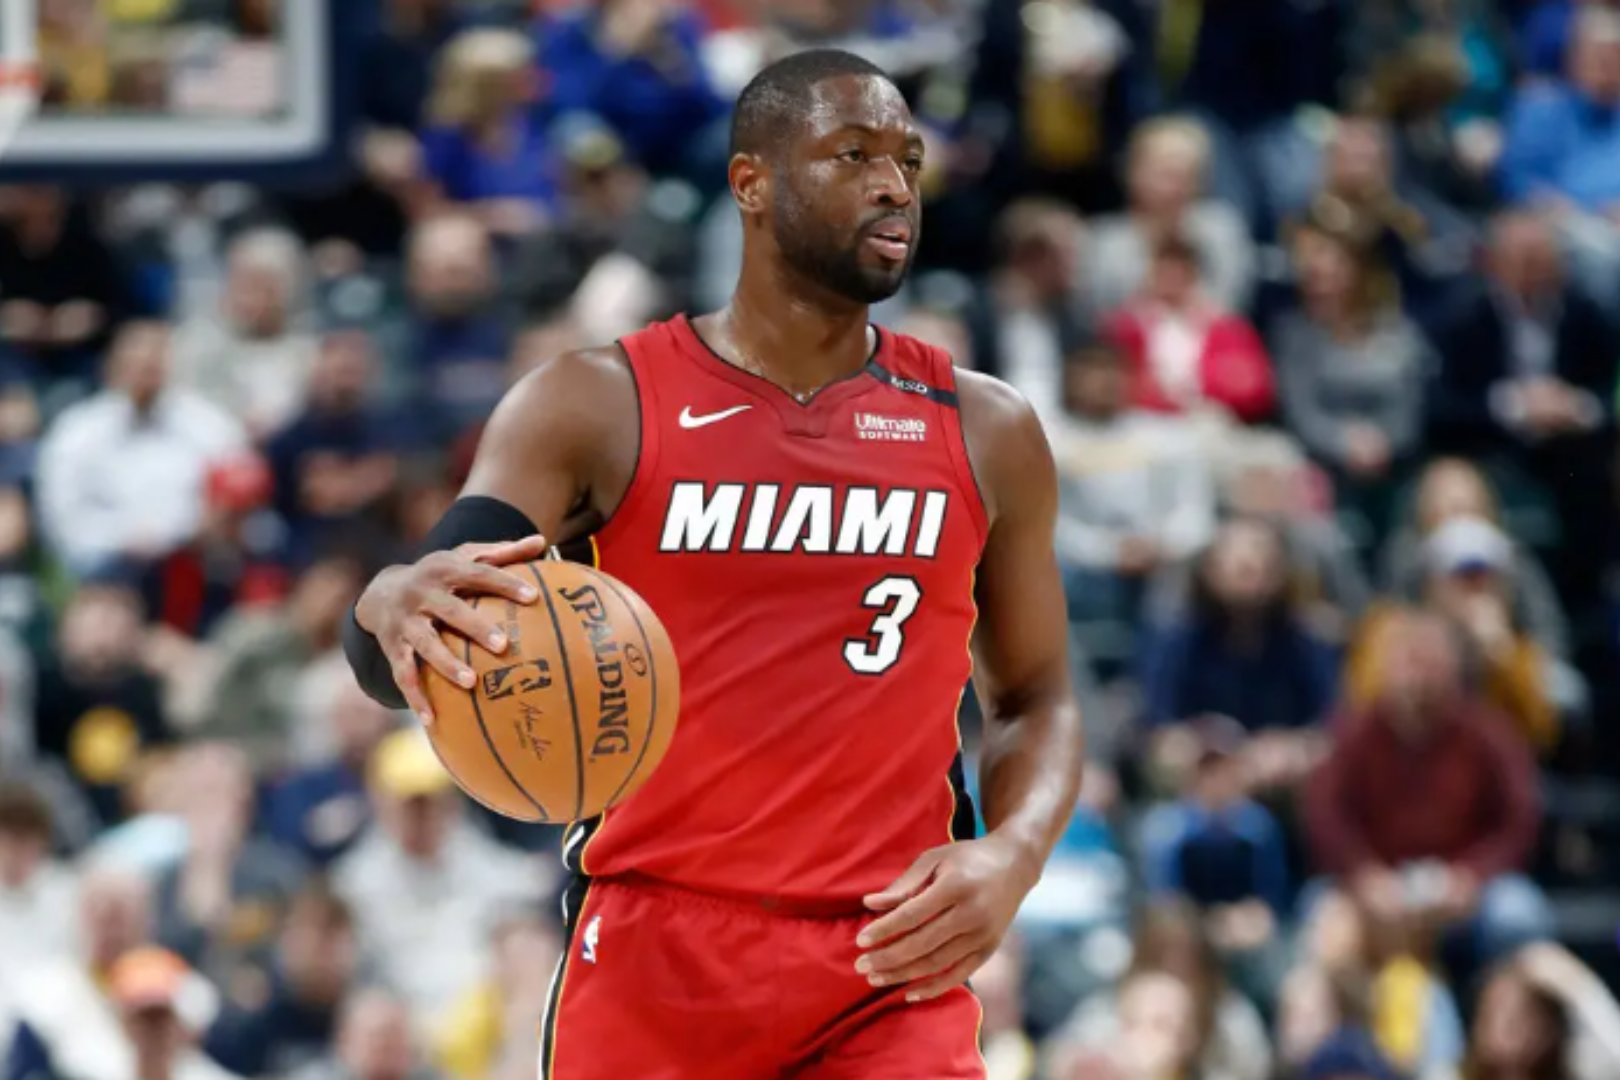 article_img / What is Dwayne Wade's Net Worth?